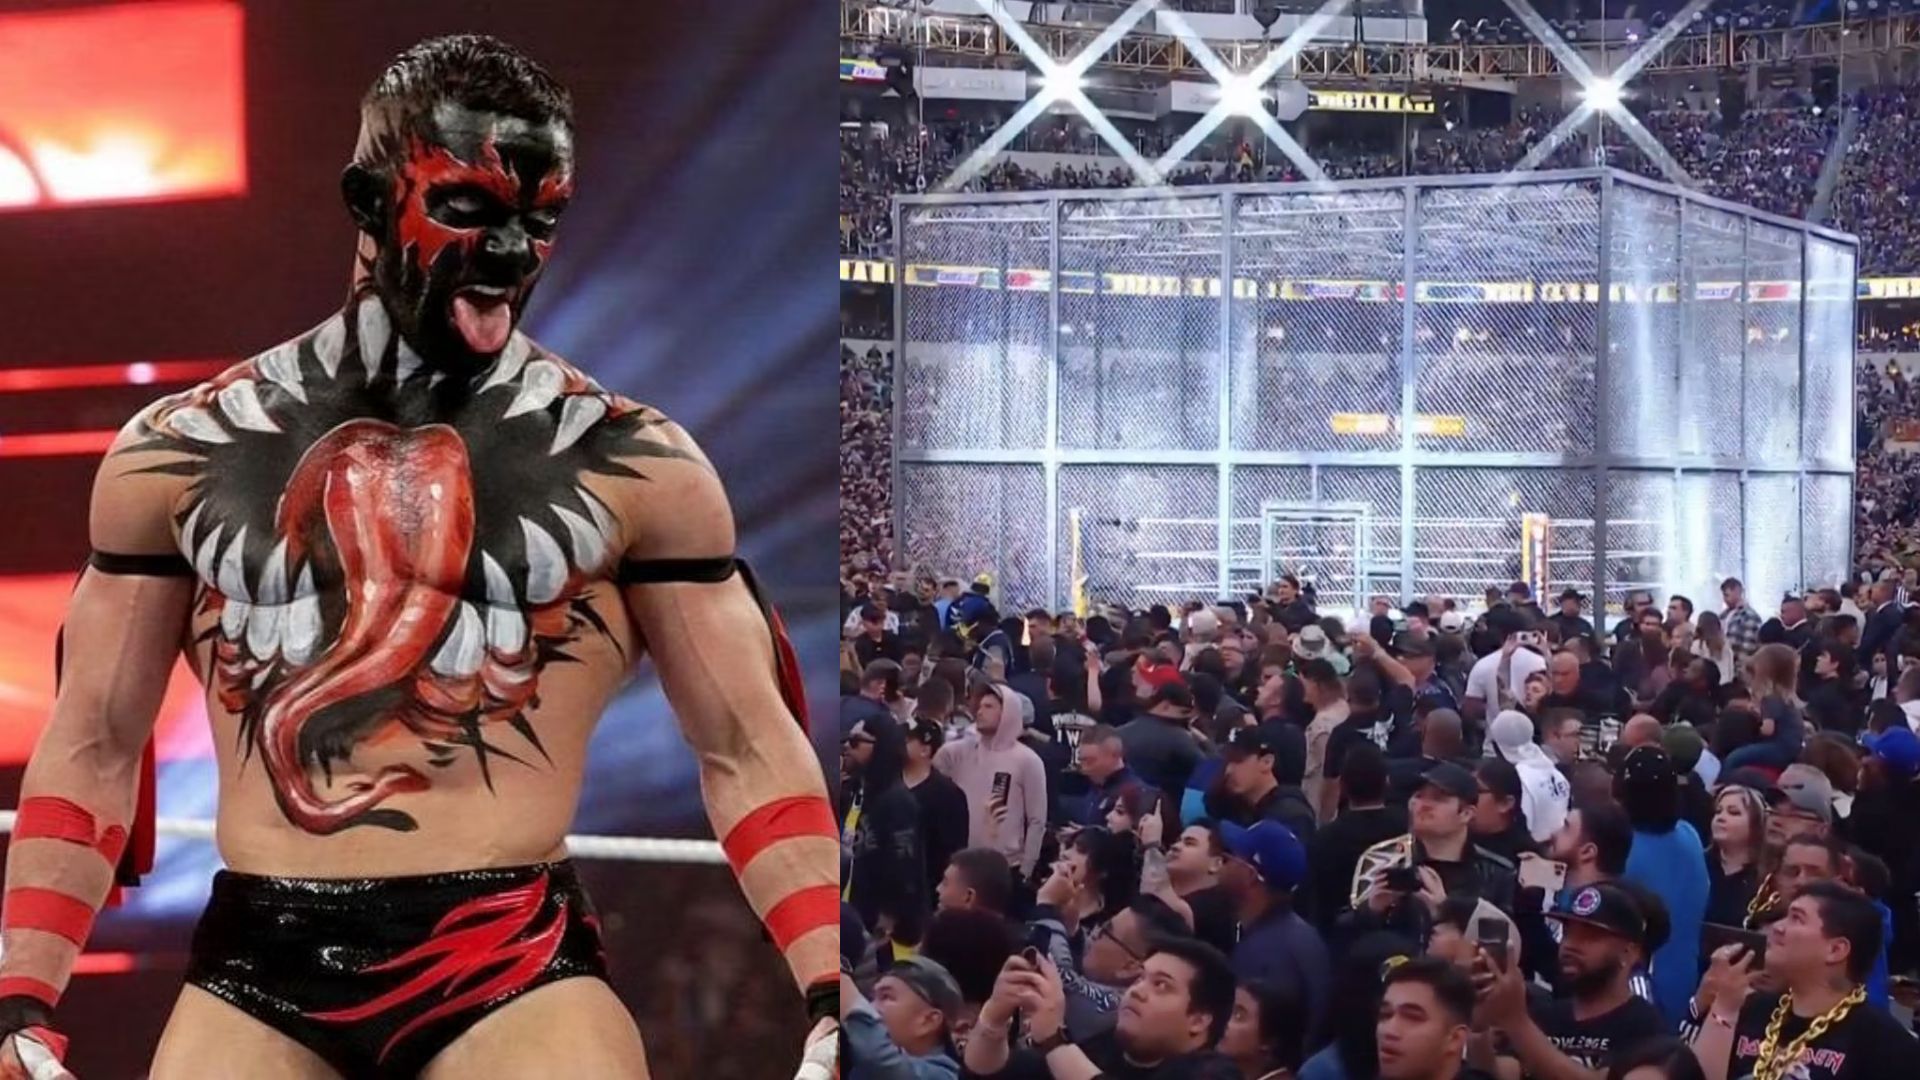 Finn Balor went face-to-face with Edge in a Hell in a Cell match at WrestleMania 39